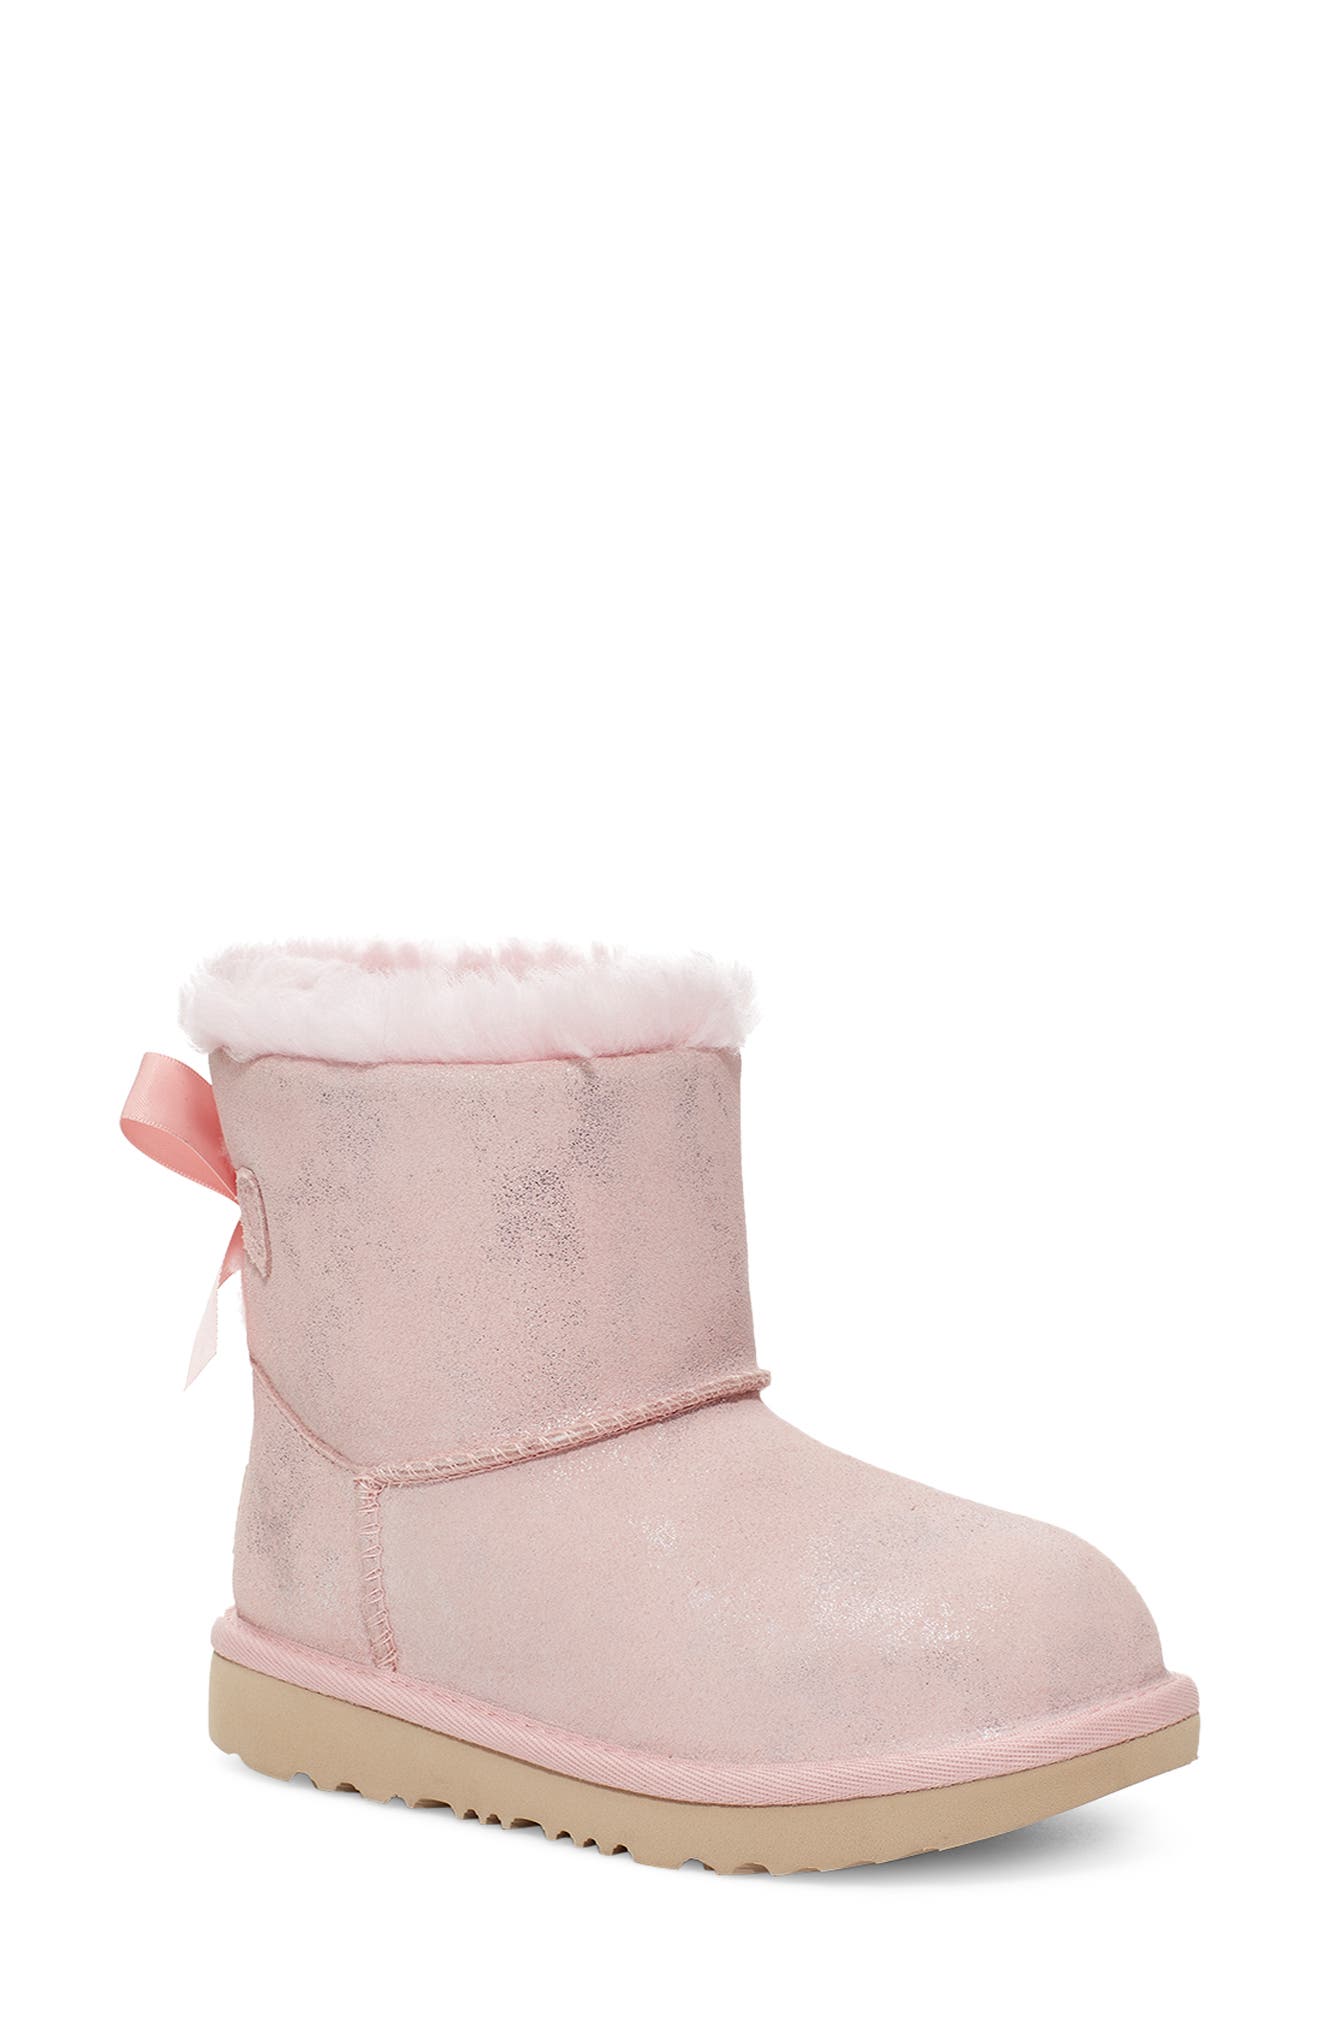 toddler uggs with bows